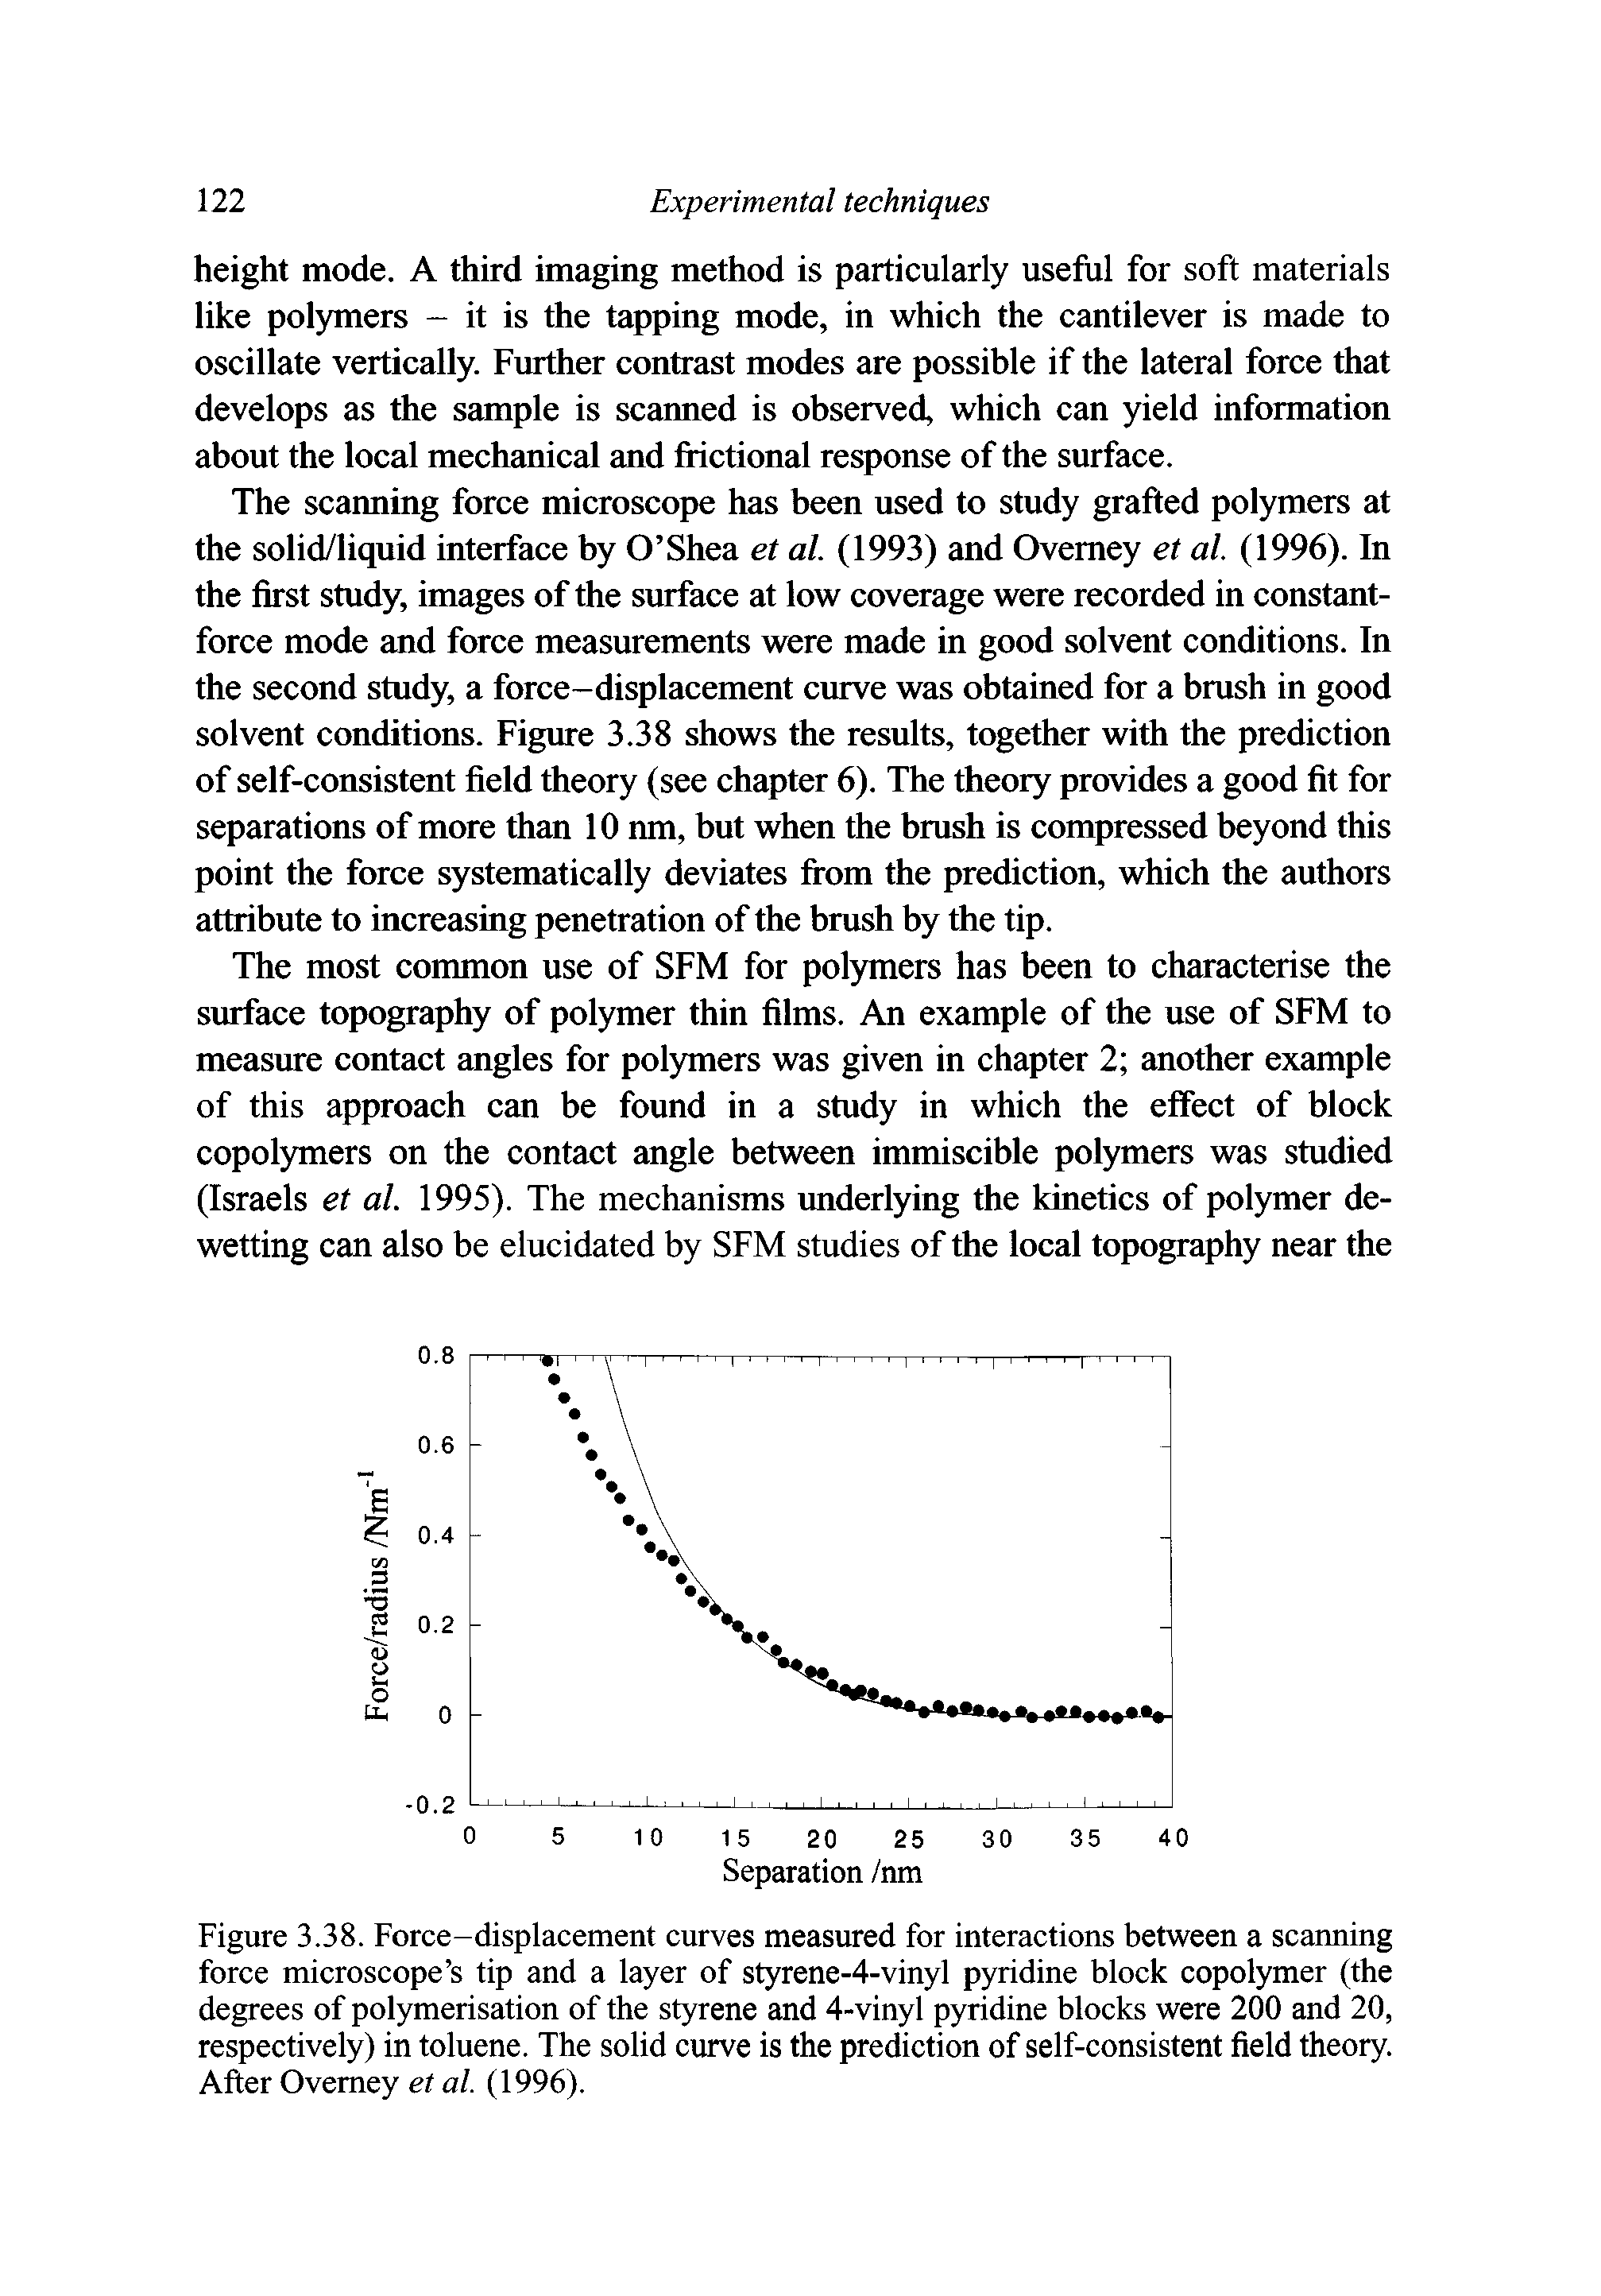 Figure 3.38. Force-displacement curves measured for interactions between a scanning force microscope s tip and a layer of styrene-4-vinyl pyridine block copolymer (the degrees of polymerisation of the styrene and 4-vinyl pyridine blocks were 200 and 20, respectively) in toluene. The solid curve is the prediction of self-consistent field theory. After Ovemey et al. (1996).